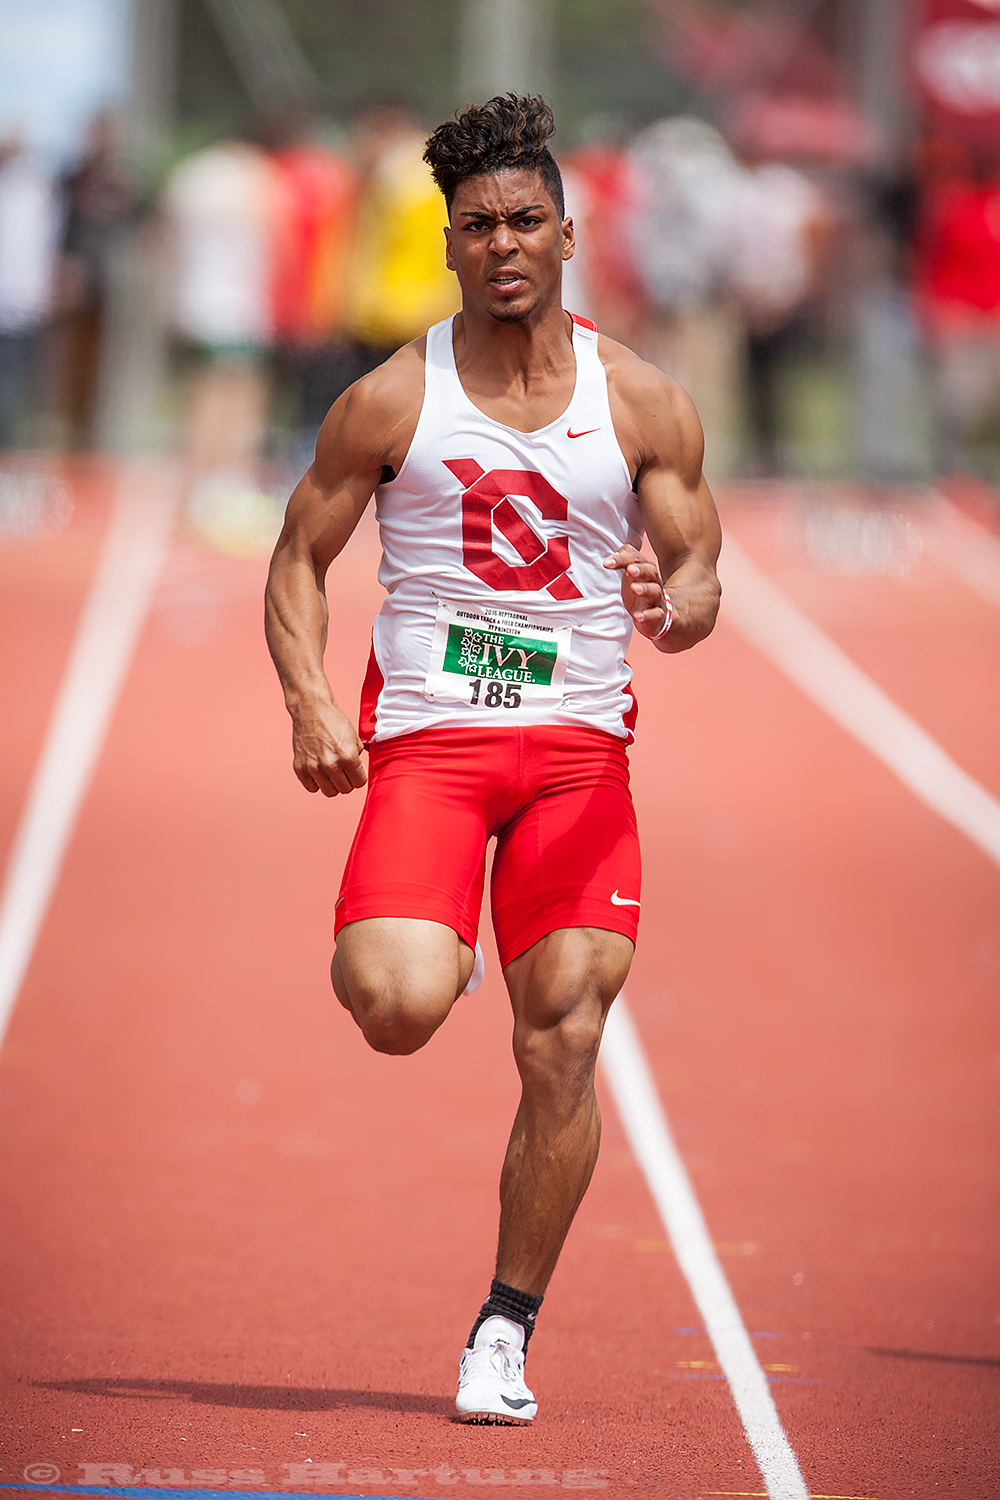 It's interesting seeing how different body types are natural fits for different events. The sprinters always have the best muscle definition for that explosive speed. 